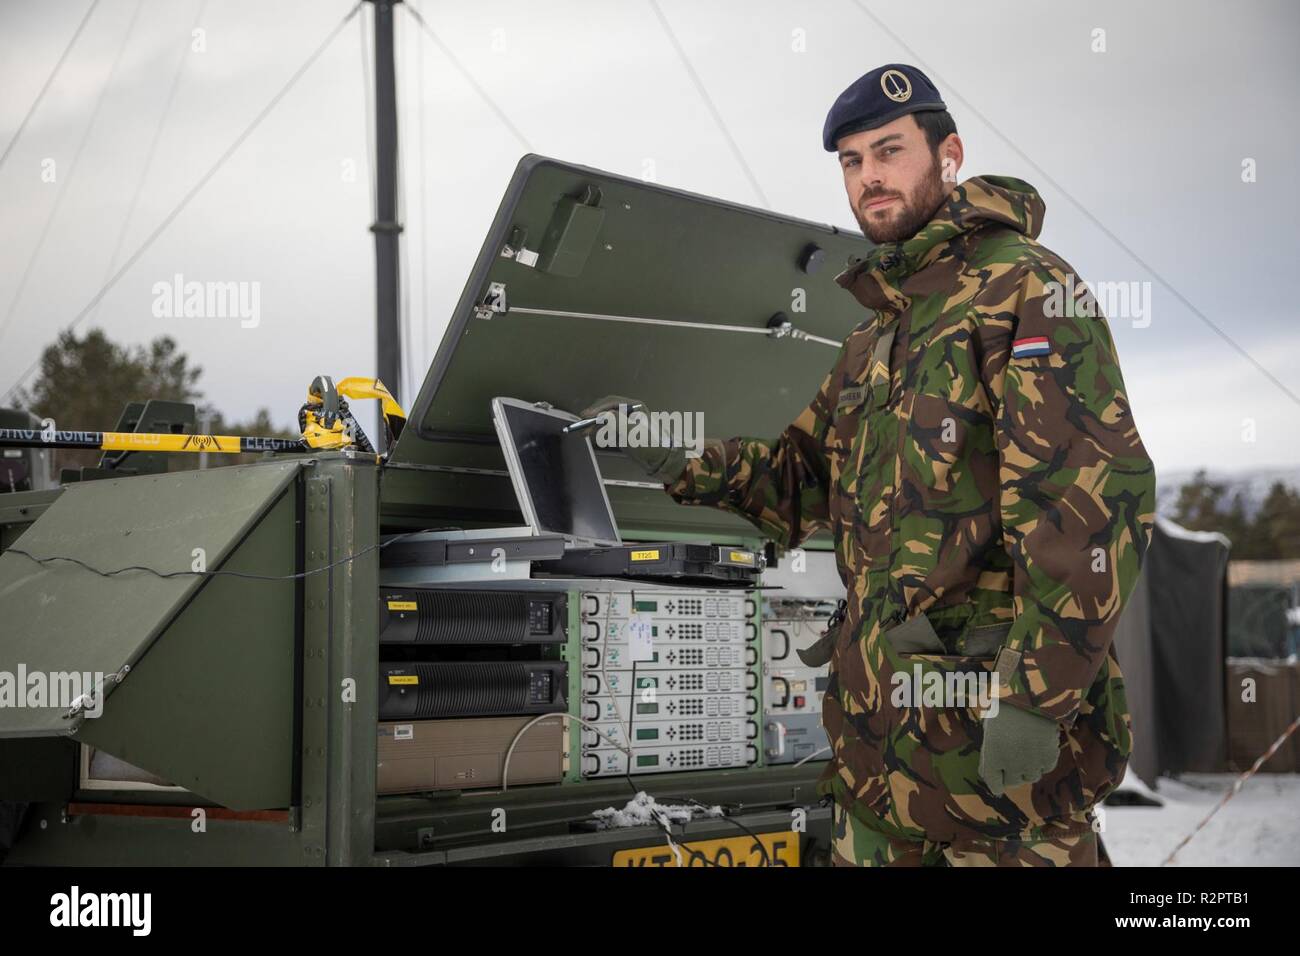 Dutch Sergeant Noordermeer checking the RACE 1 equipment. 1 German/Netherlands Corps' Communication and Information Systems Battalion is responsible for the communication between the Headquarters and its brigades. RACE 1 provides the CIS link between 1GNC as LCC and the Italian Ariete Brigade for Exercise Trident Juncture.    With around 50,000 personnel participating in Trident Juncture 2018, it is one of the largest NATO exercises in recent years. Around 250 aircraft, 65 vessels and more than 10,000 vehicles are involved in the exercise in Norway. Stock Photo